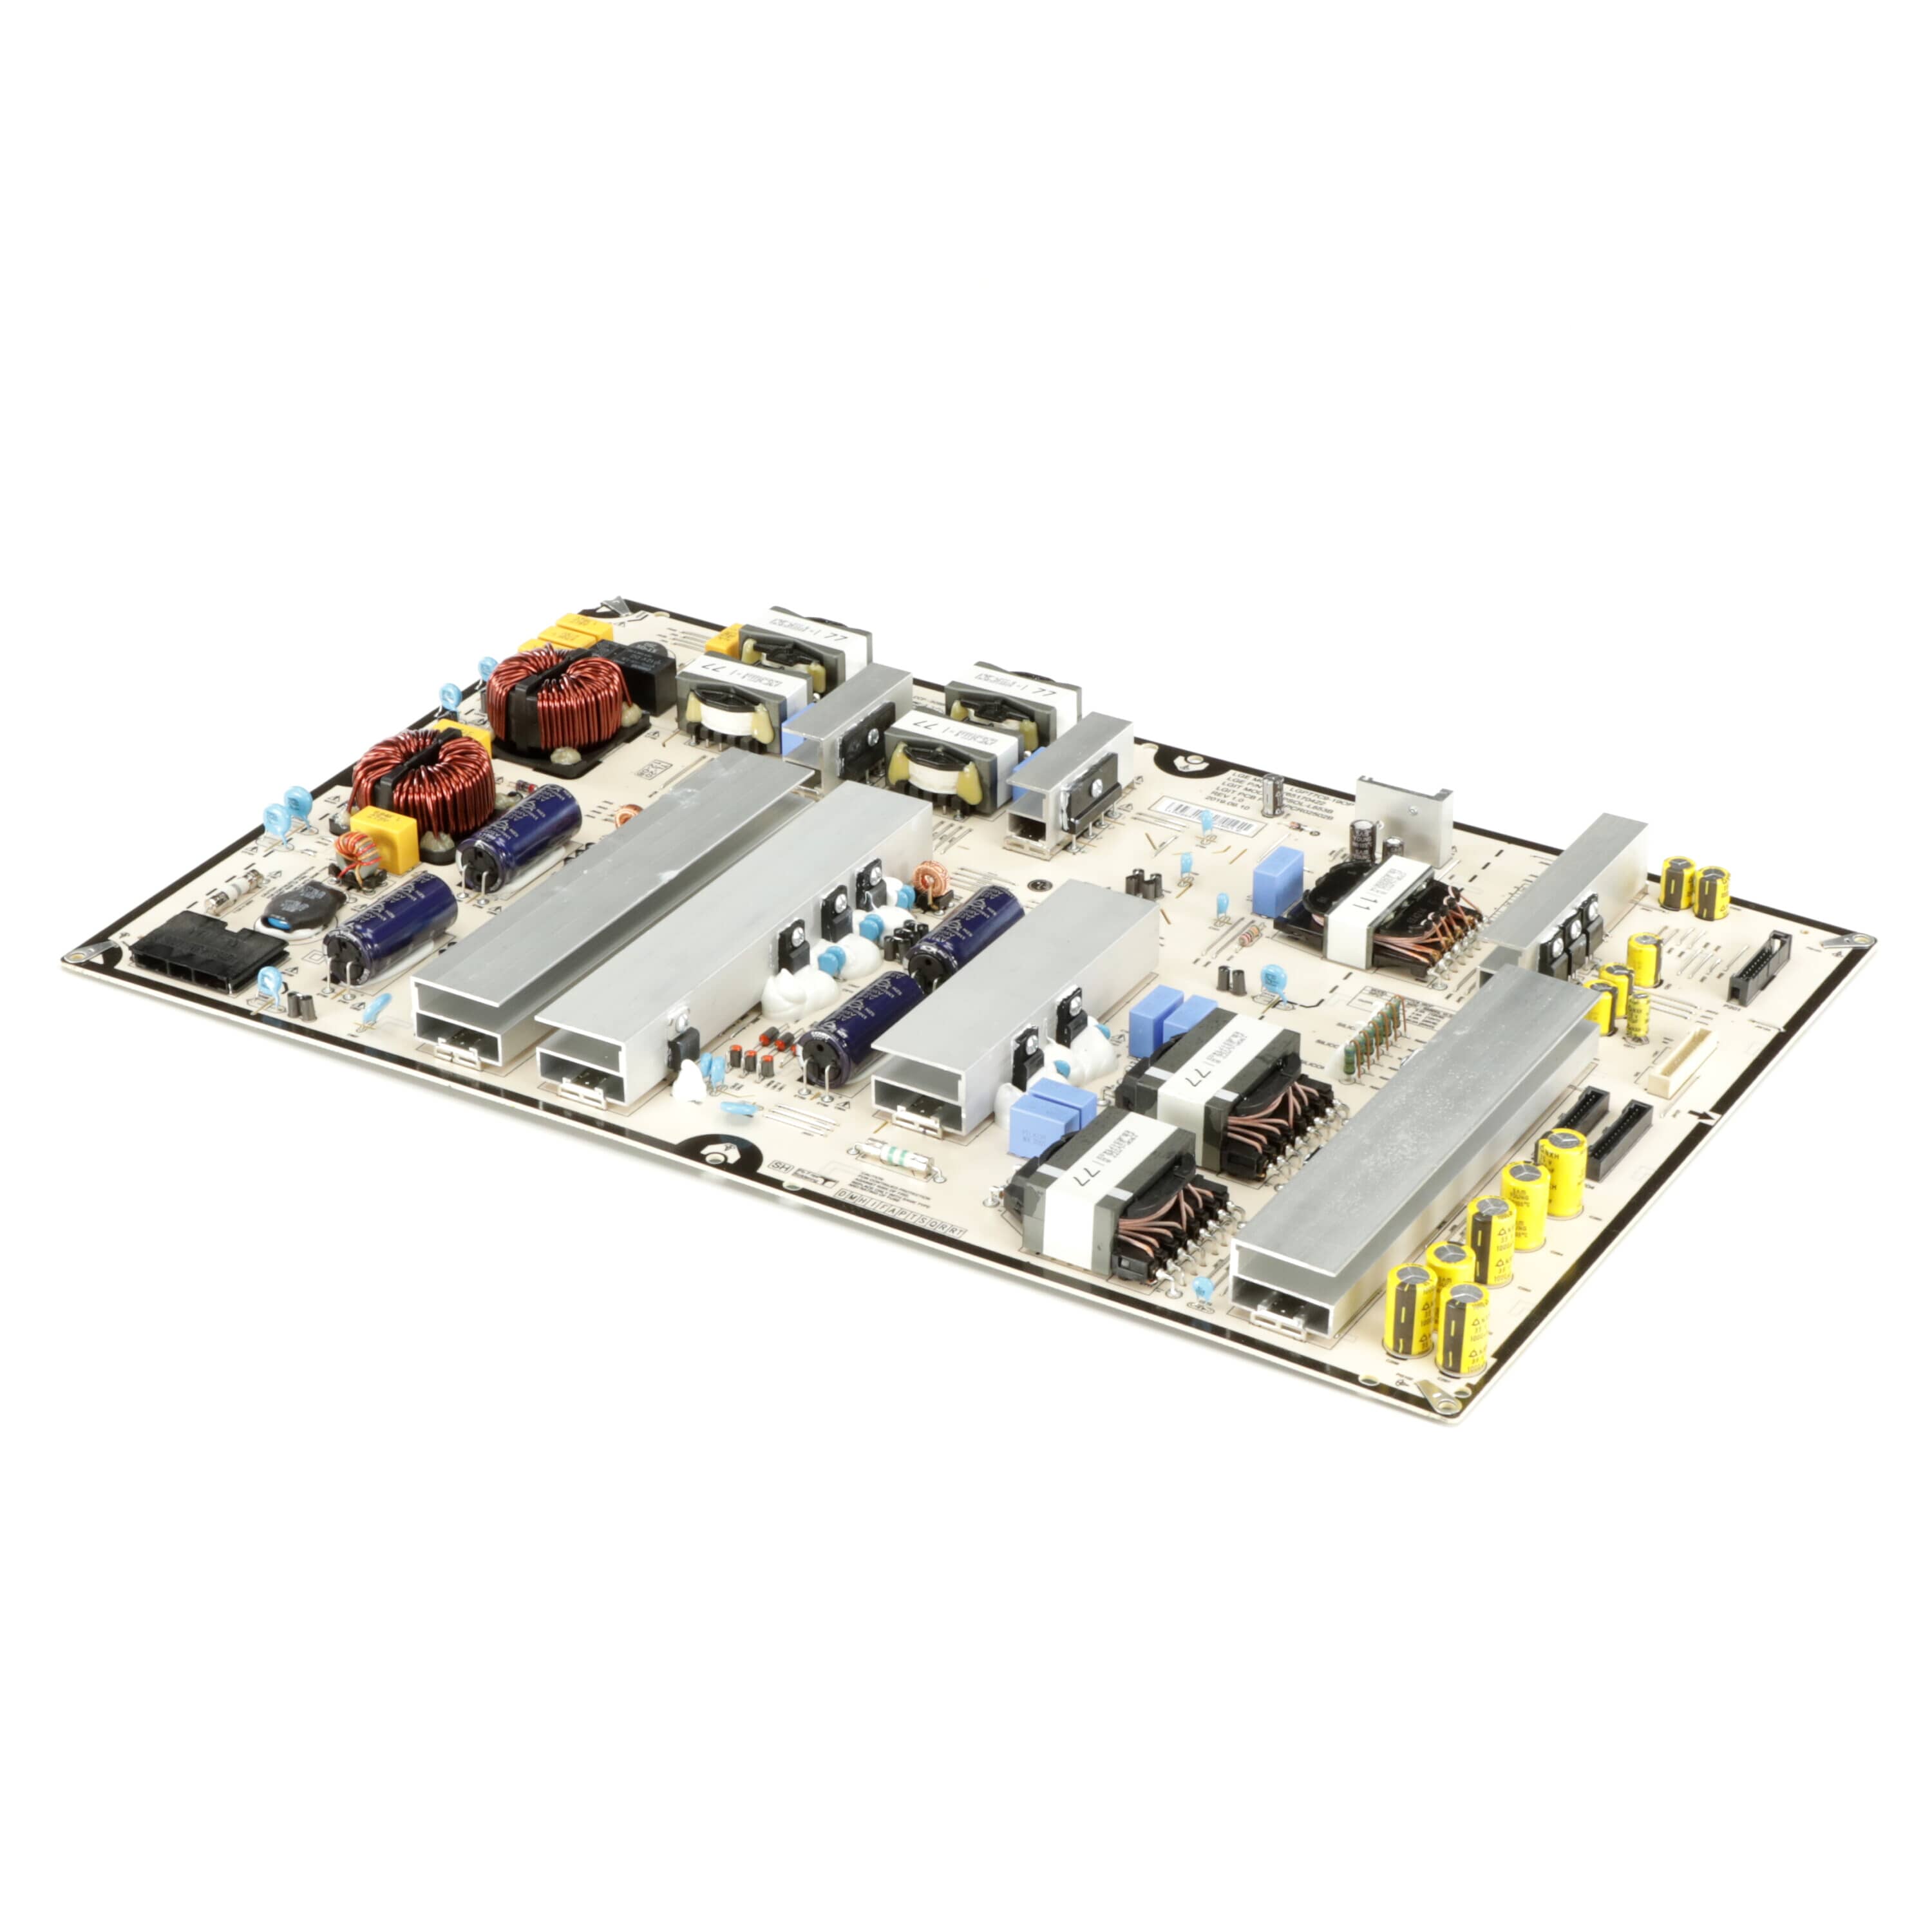 LG EAY65170422 Power Supply Assembly